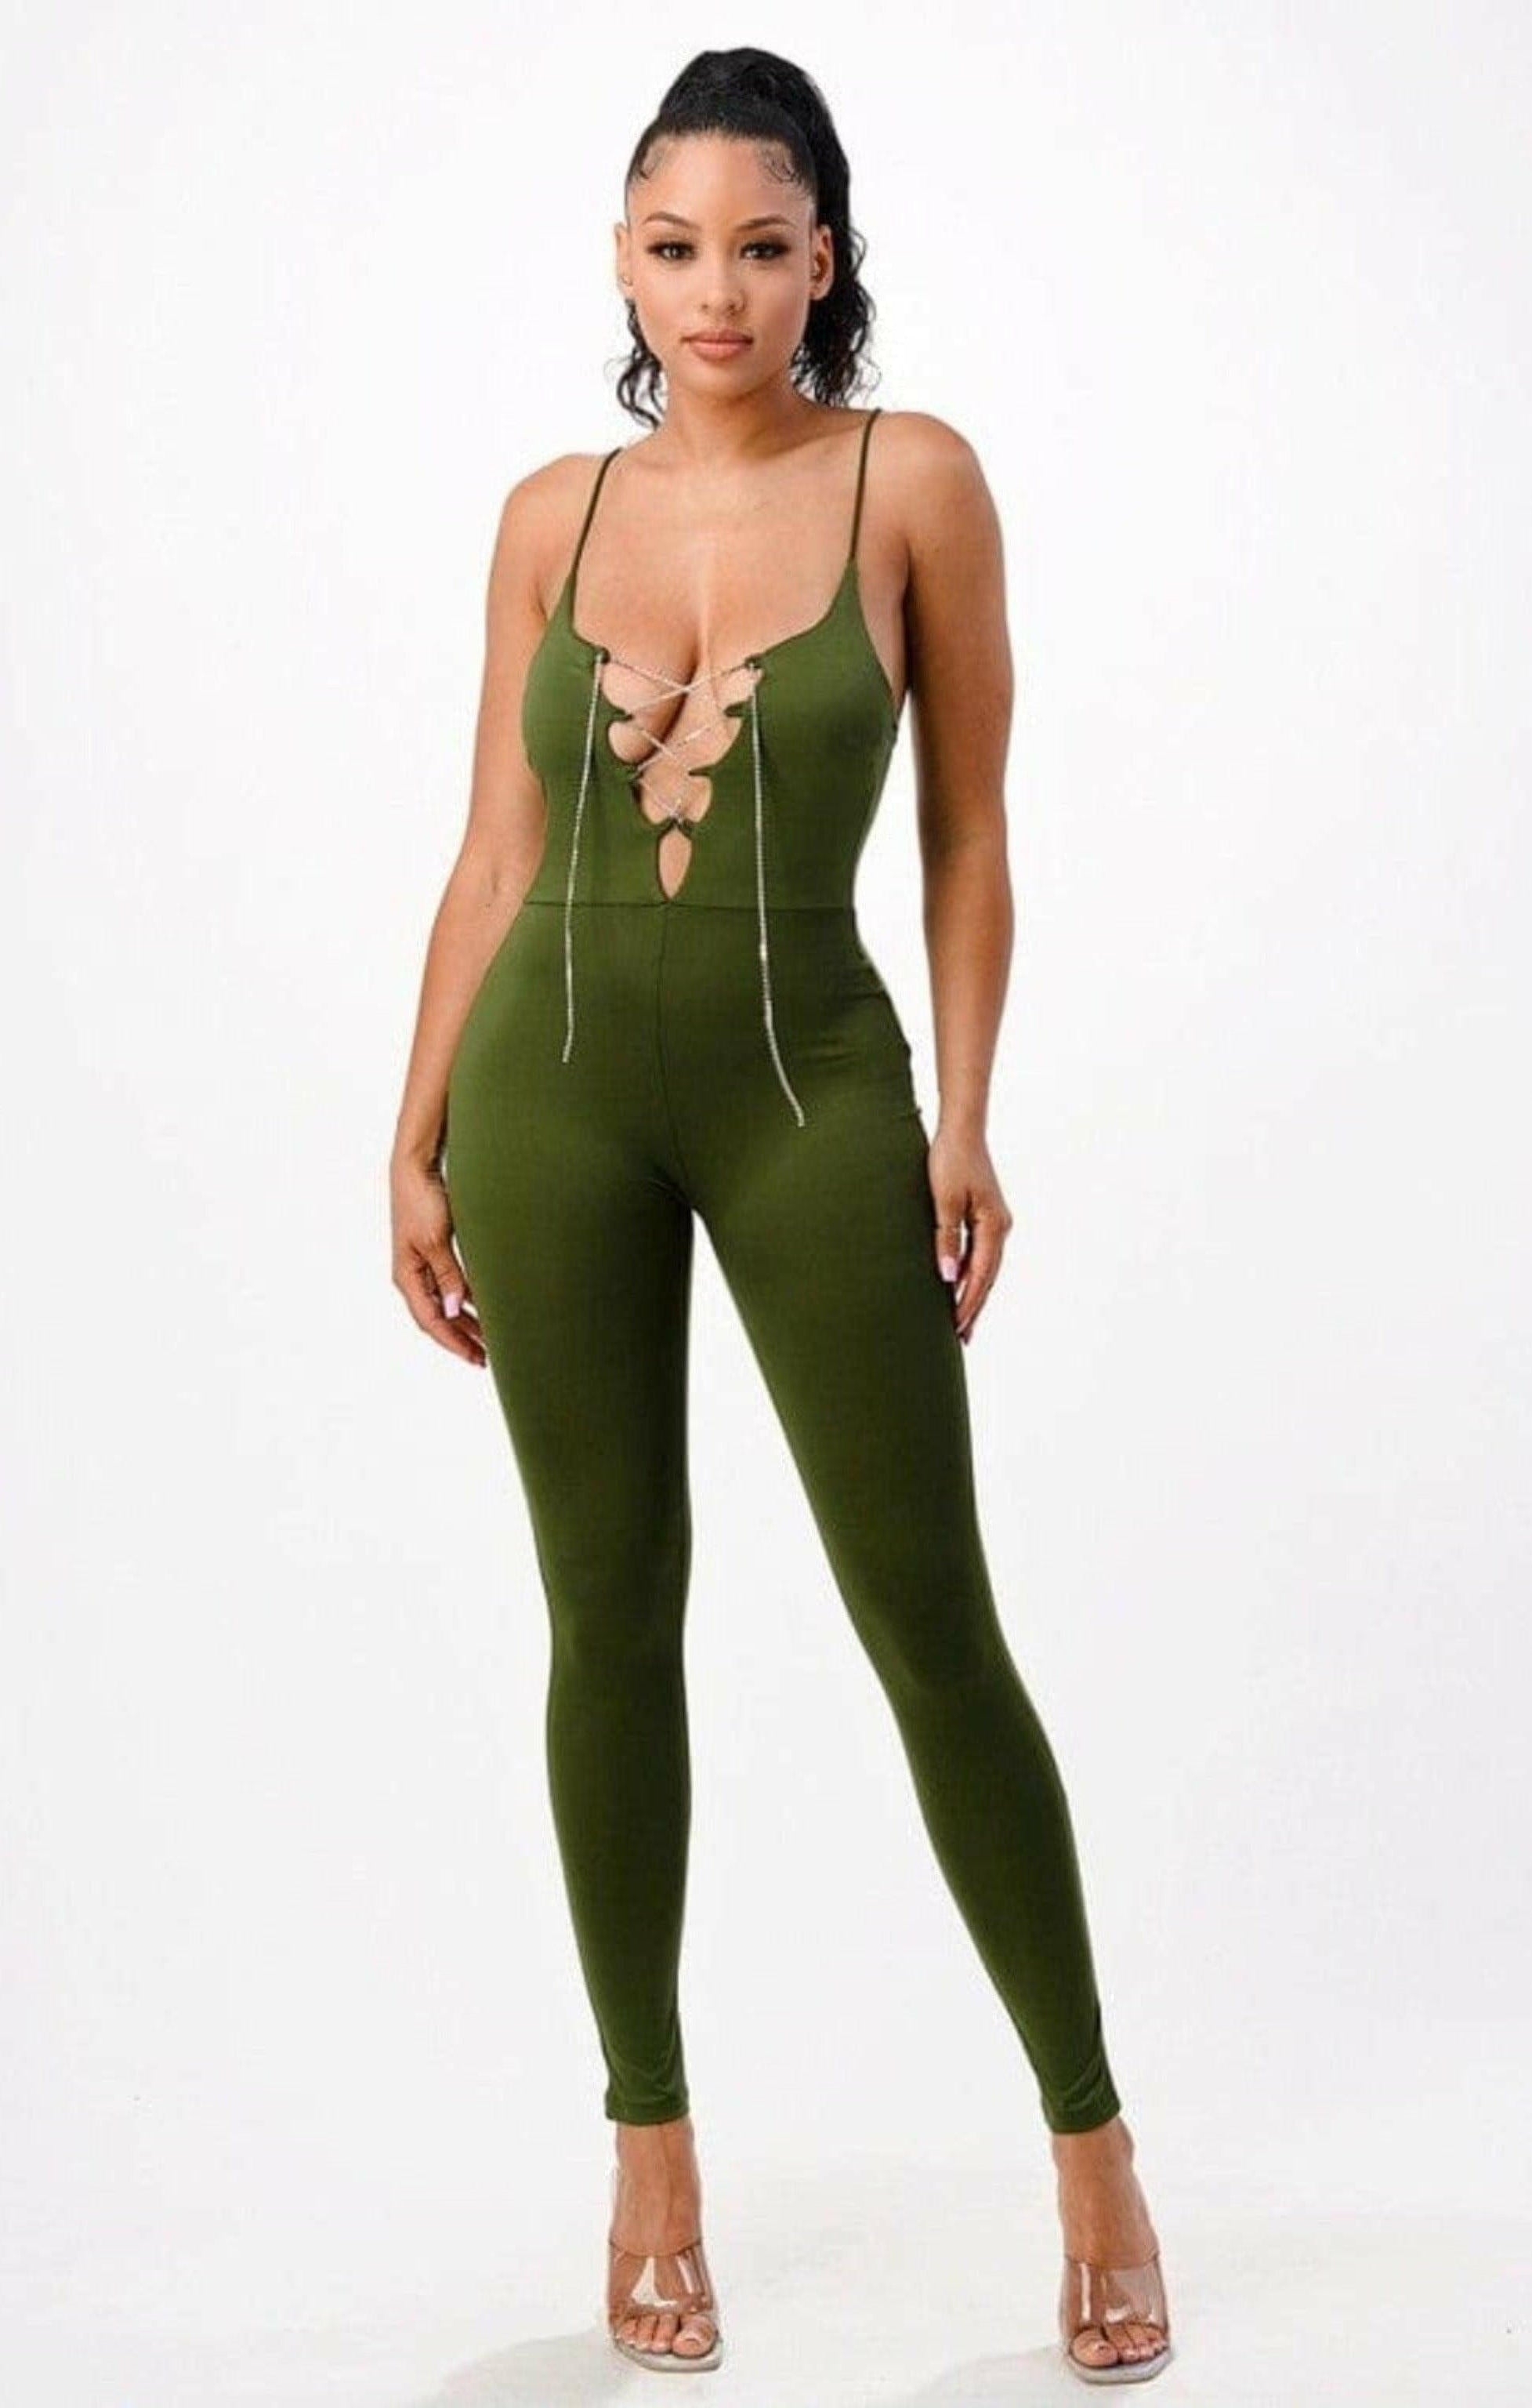 Epicplacess jumpsuits SMALL / GREEN / UNITED STATES Spaghetti Strap V Front Lace Up Jumpsuits 